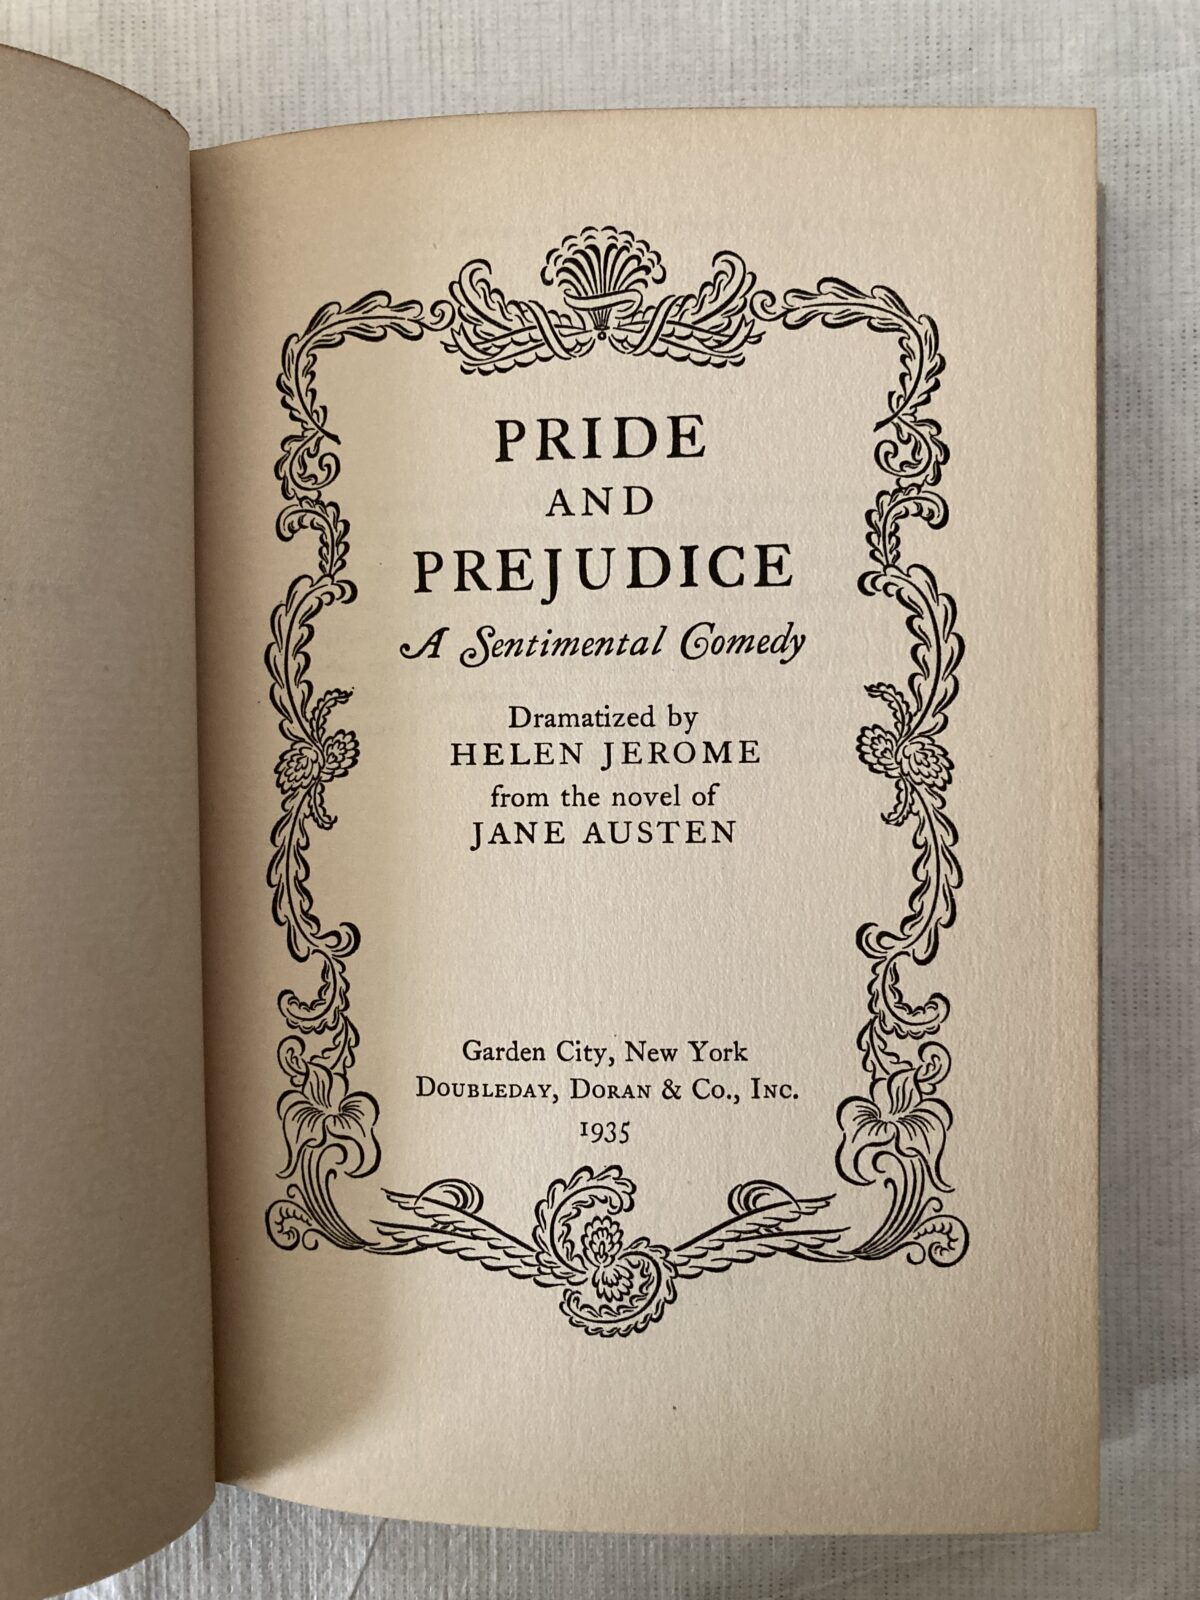 Title page of Pride and Prejudice, A Sentimental Comedy, by Helen Jerome. Published by Doubleday, Doran & Co, New York. First edition, 1935